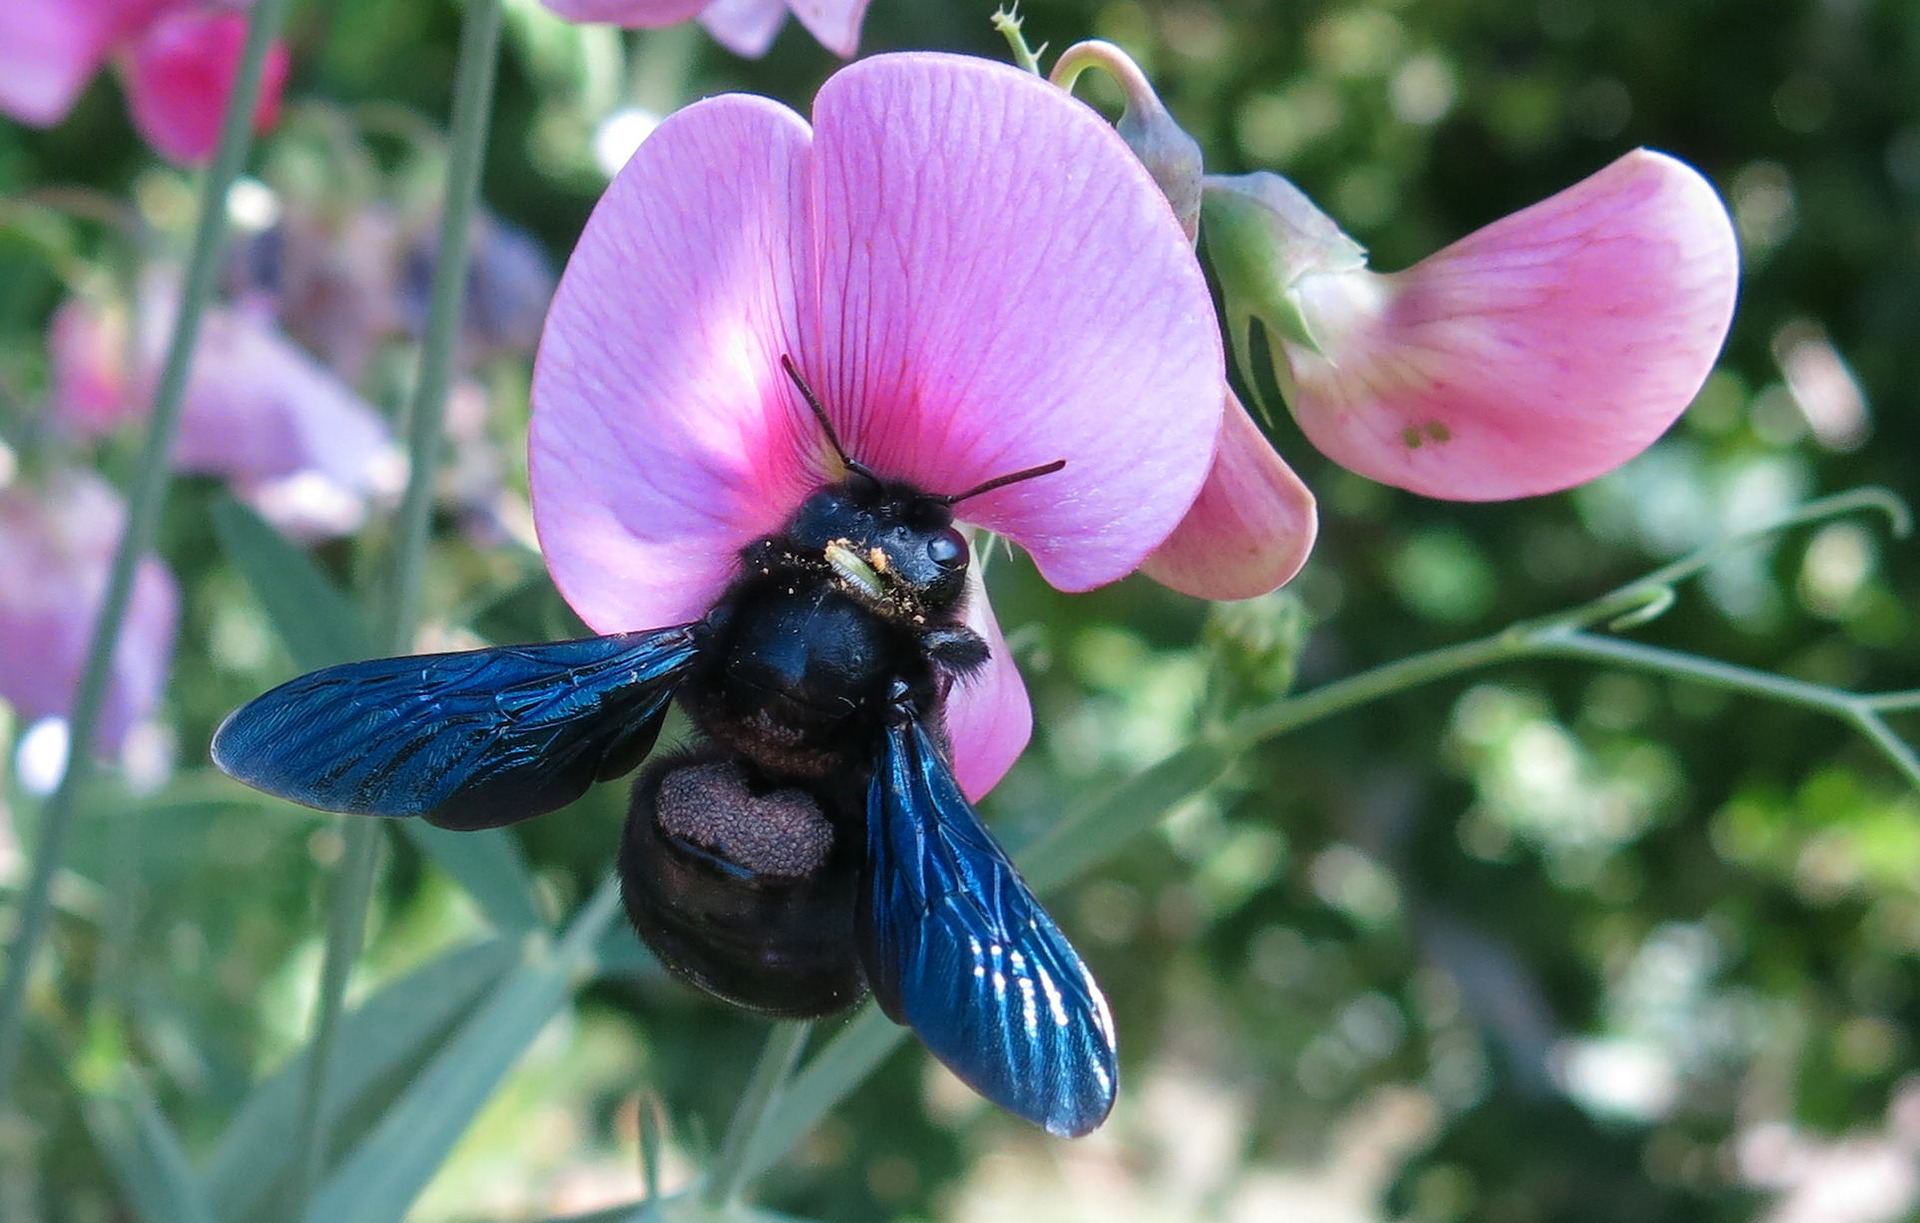 The Apidae family is perhaps the most well known of bee families, with familiar members such as the honeybee, carpenter bee (pictured), and bumblebee. All bees have stiff hairs and pockets on their legs that allow them to collect more pollen and be more efficient transporters of it between plants.